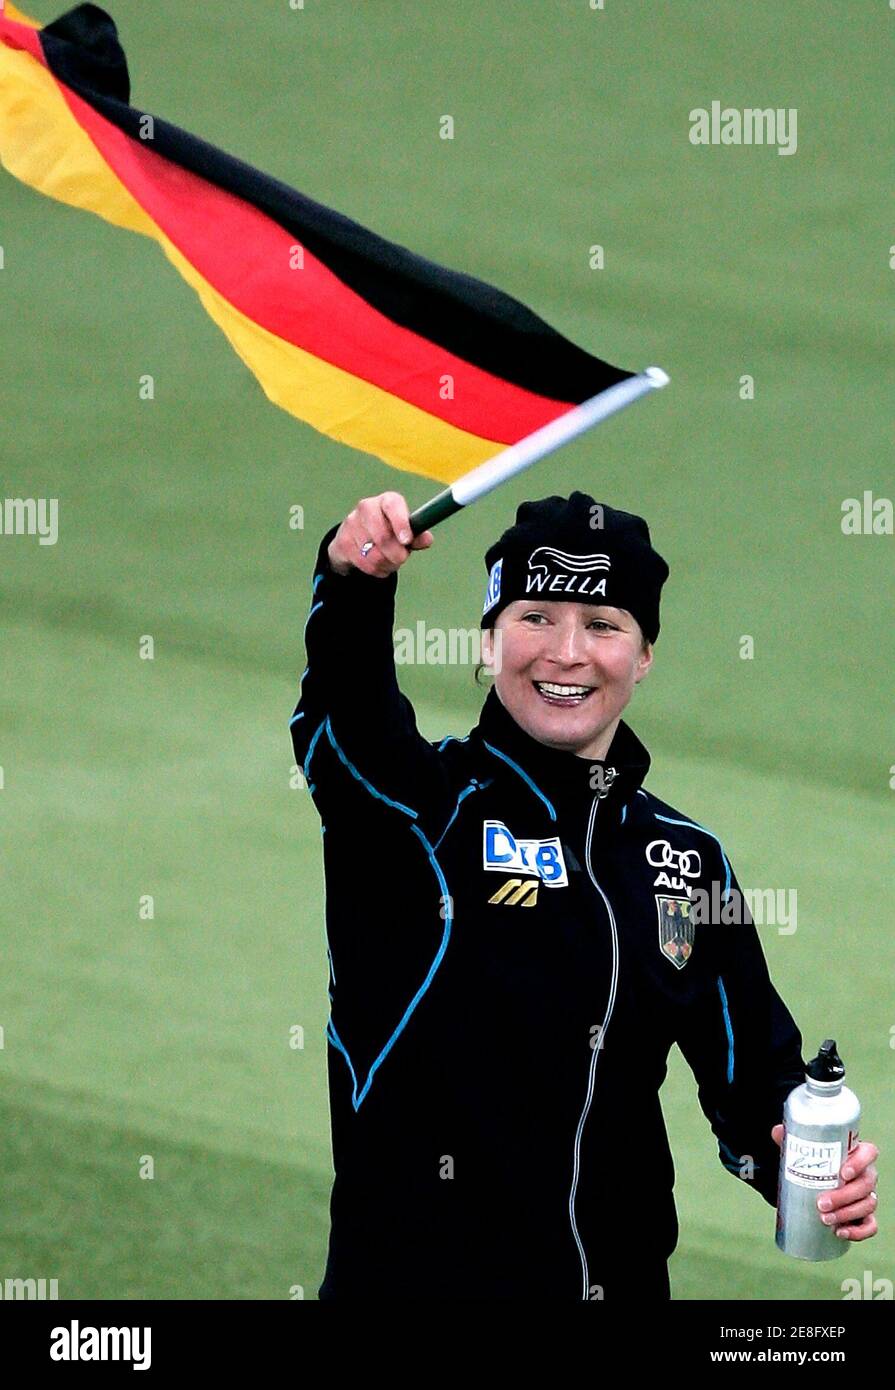 Germany's Claudia Pechstein celebrates after winning the European all round Speedskating Championships at the Vikingship Olympic arena in Hamar, Norway January 15, 2006. REUTERS/Jerry Lampen Stock Photo